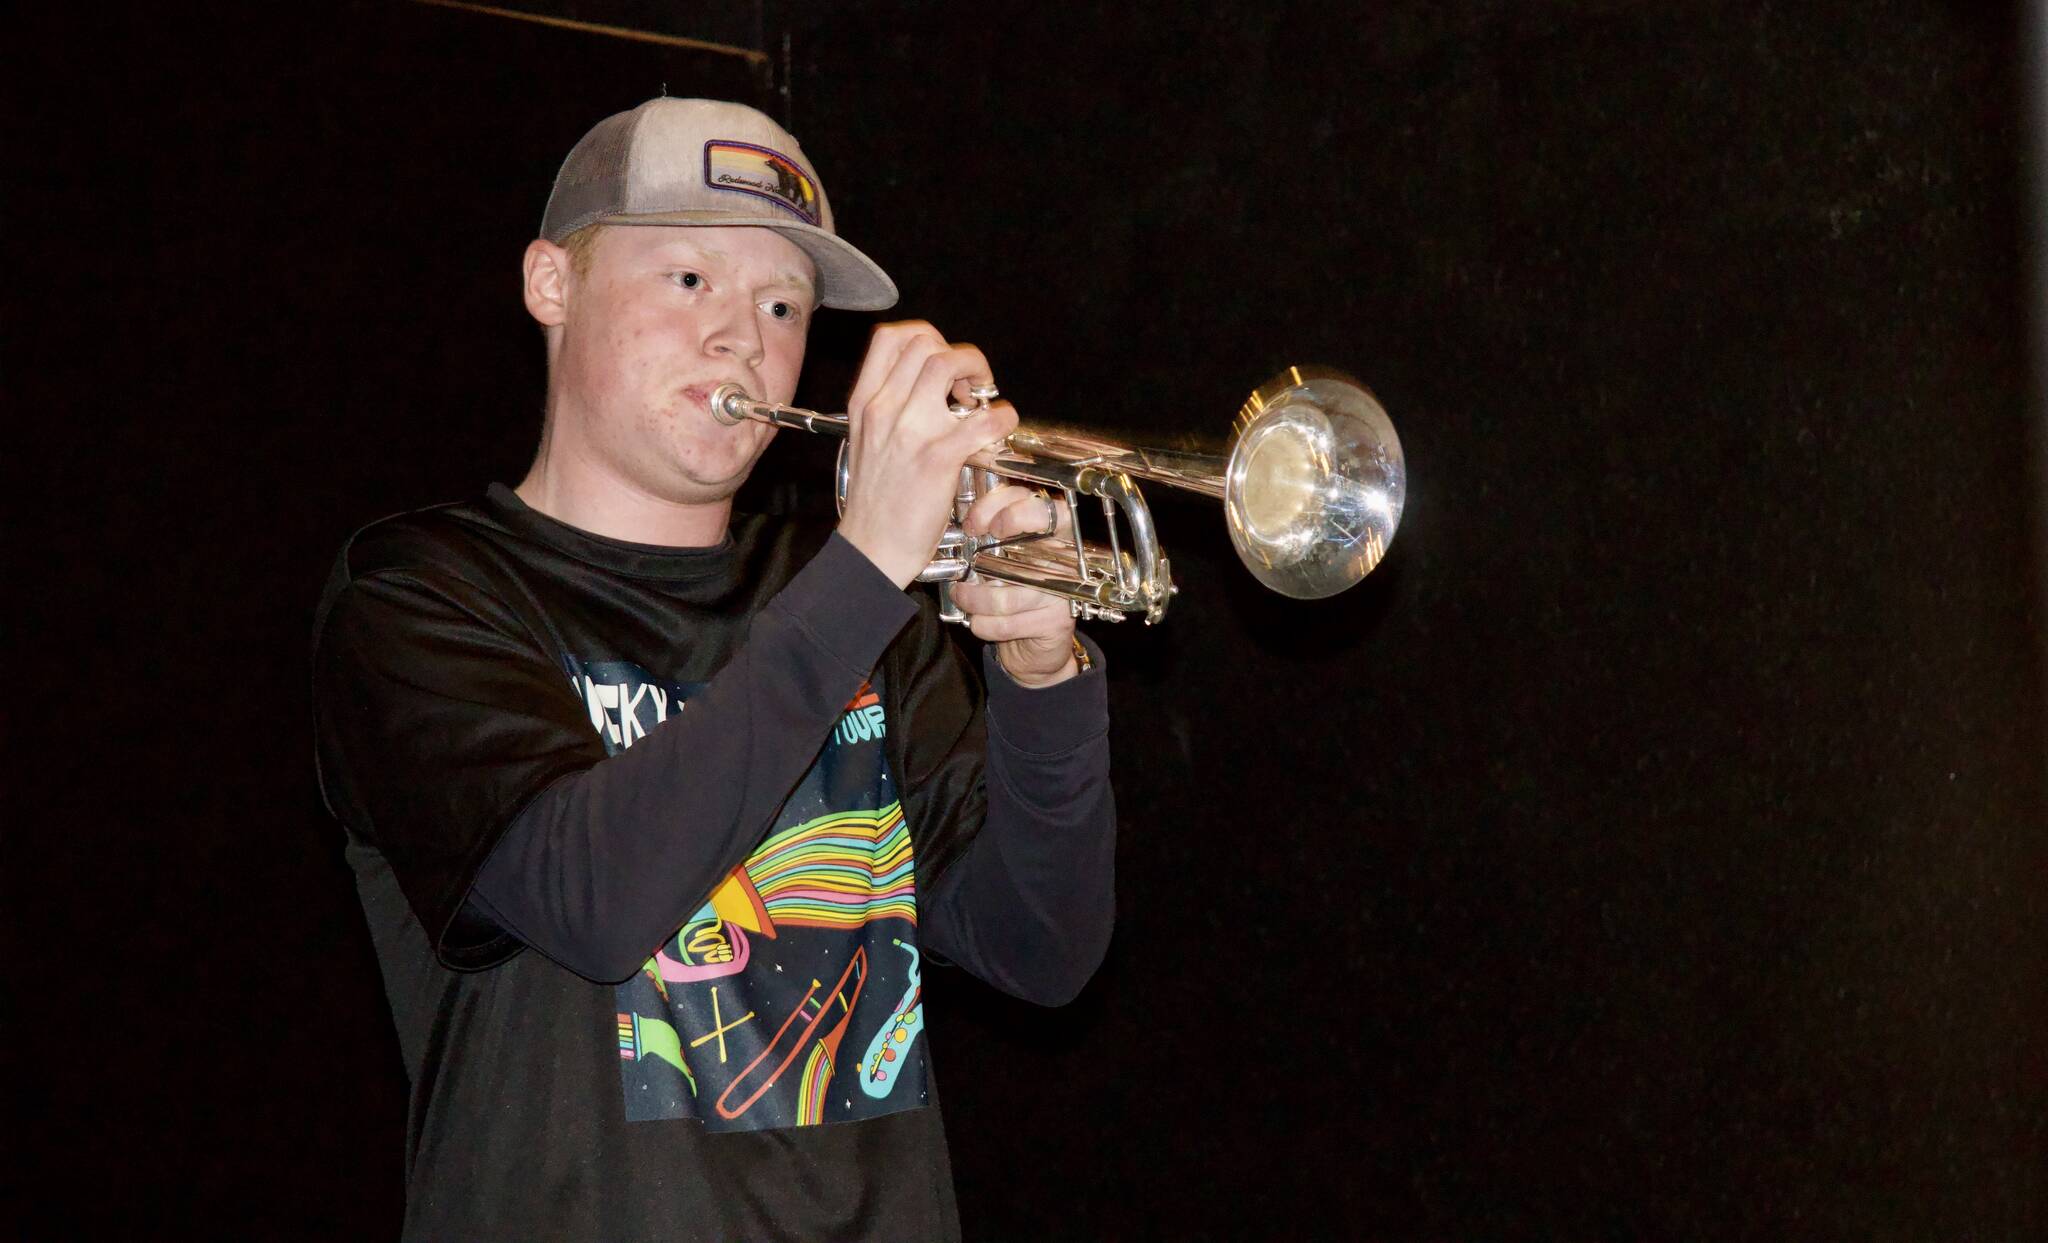 Photo by Rachel Rosen/Whidbey News-Times
Jake Bailey is the trumpet player for the band.